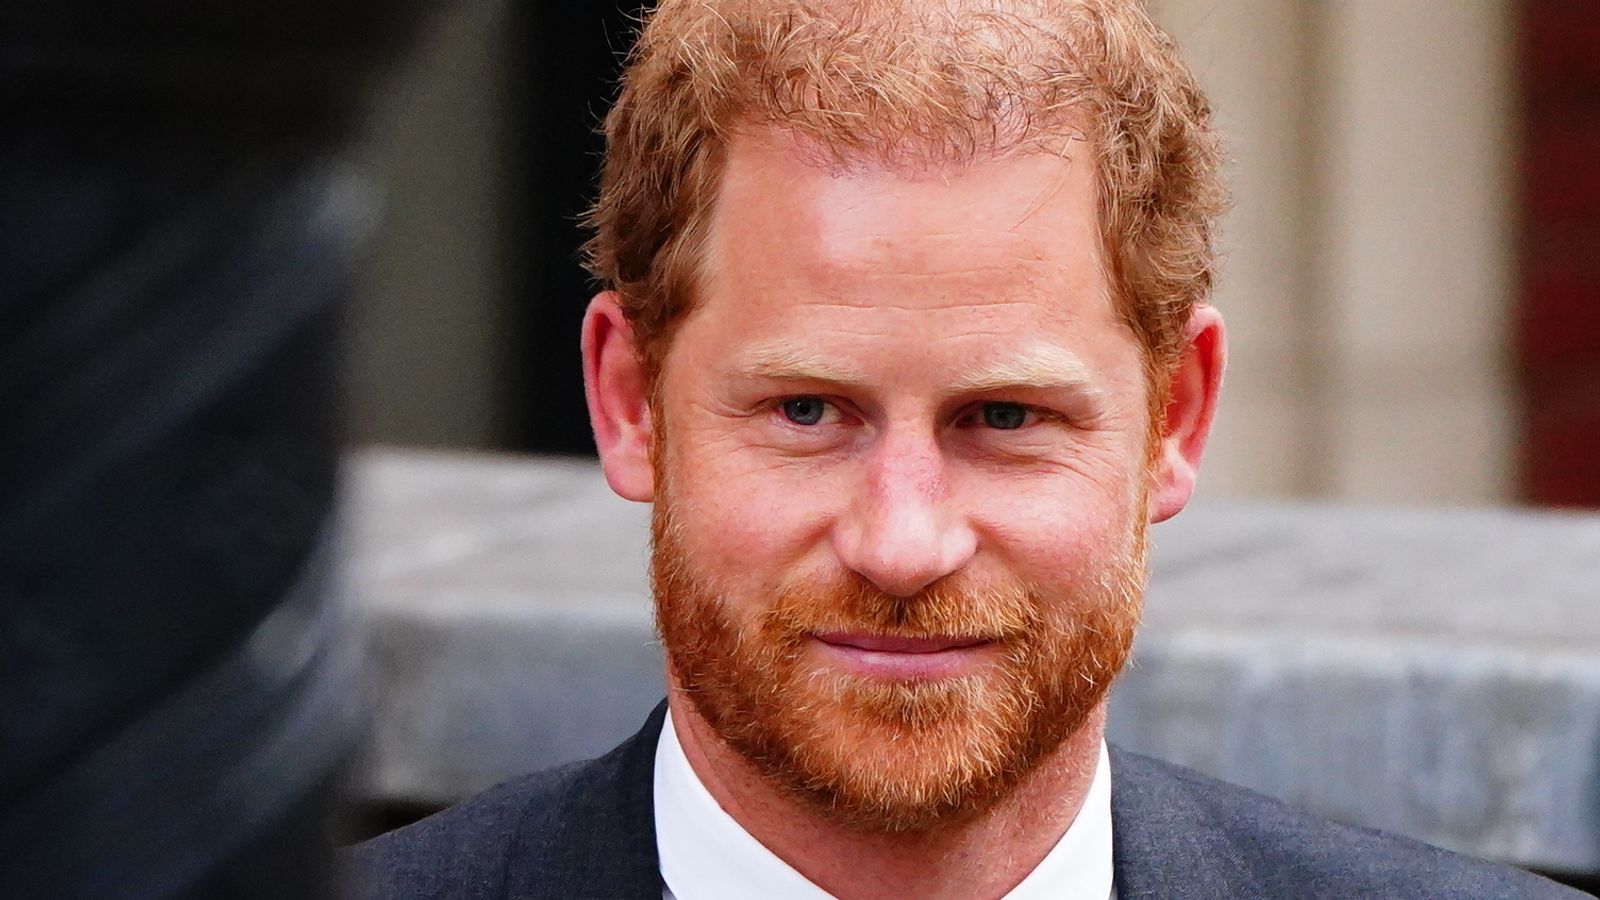 Prince Harry hacking trial: Daily Mirror publisher apologises for ordering unlawful gathering of information